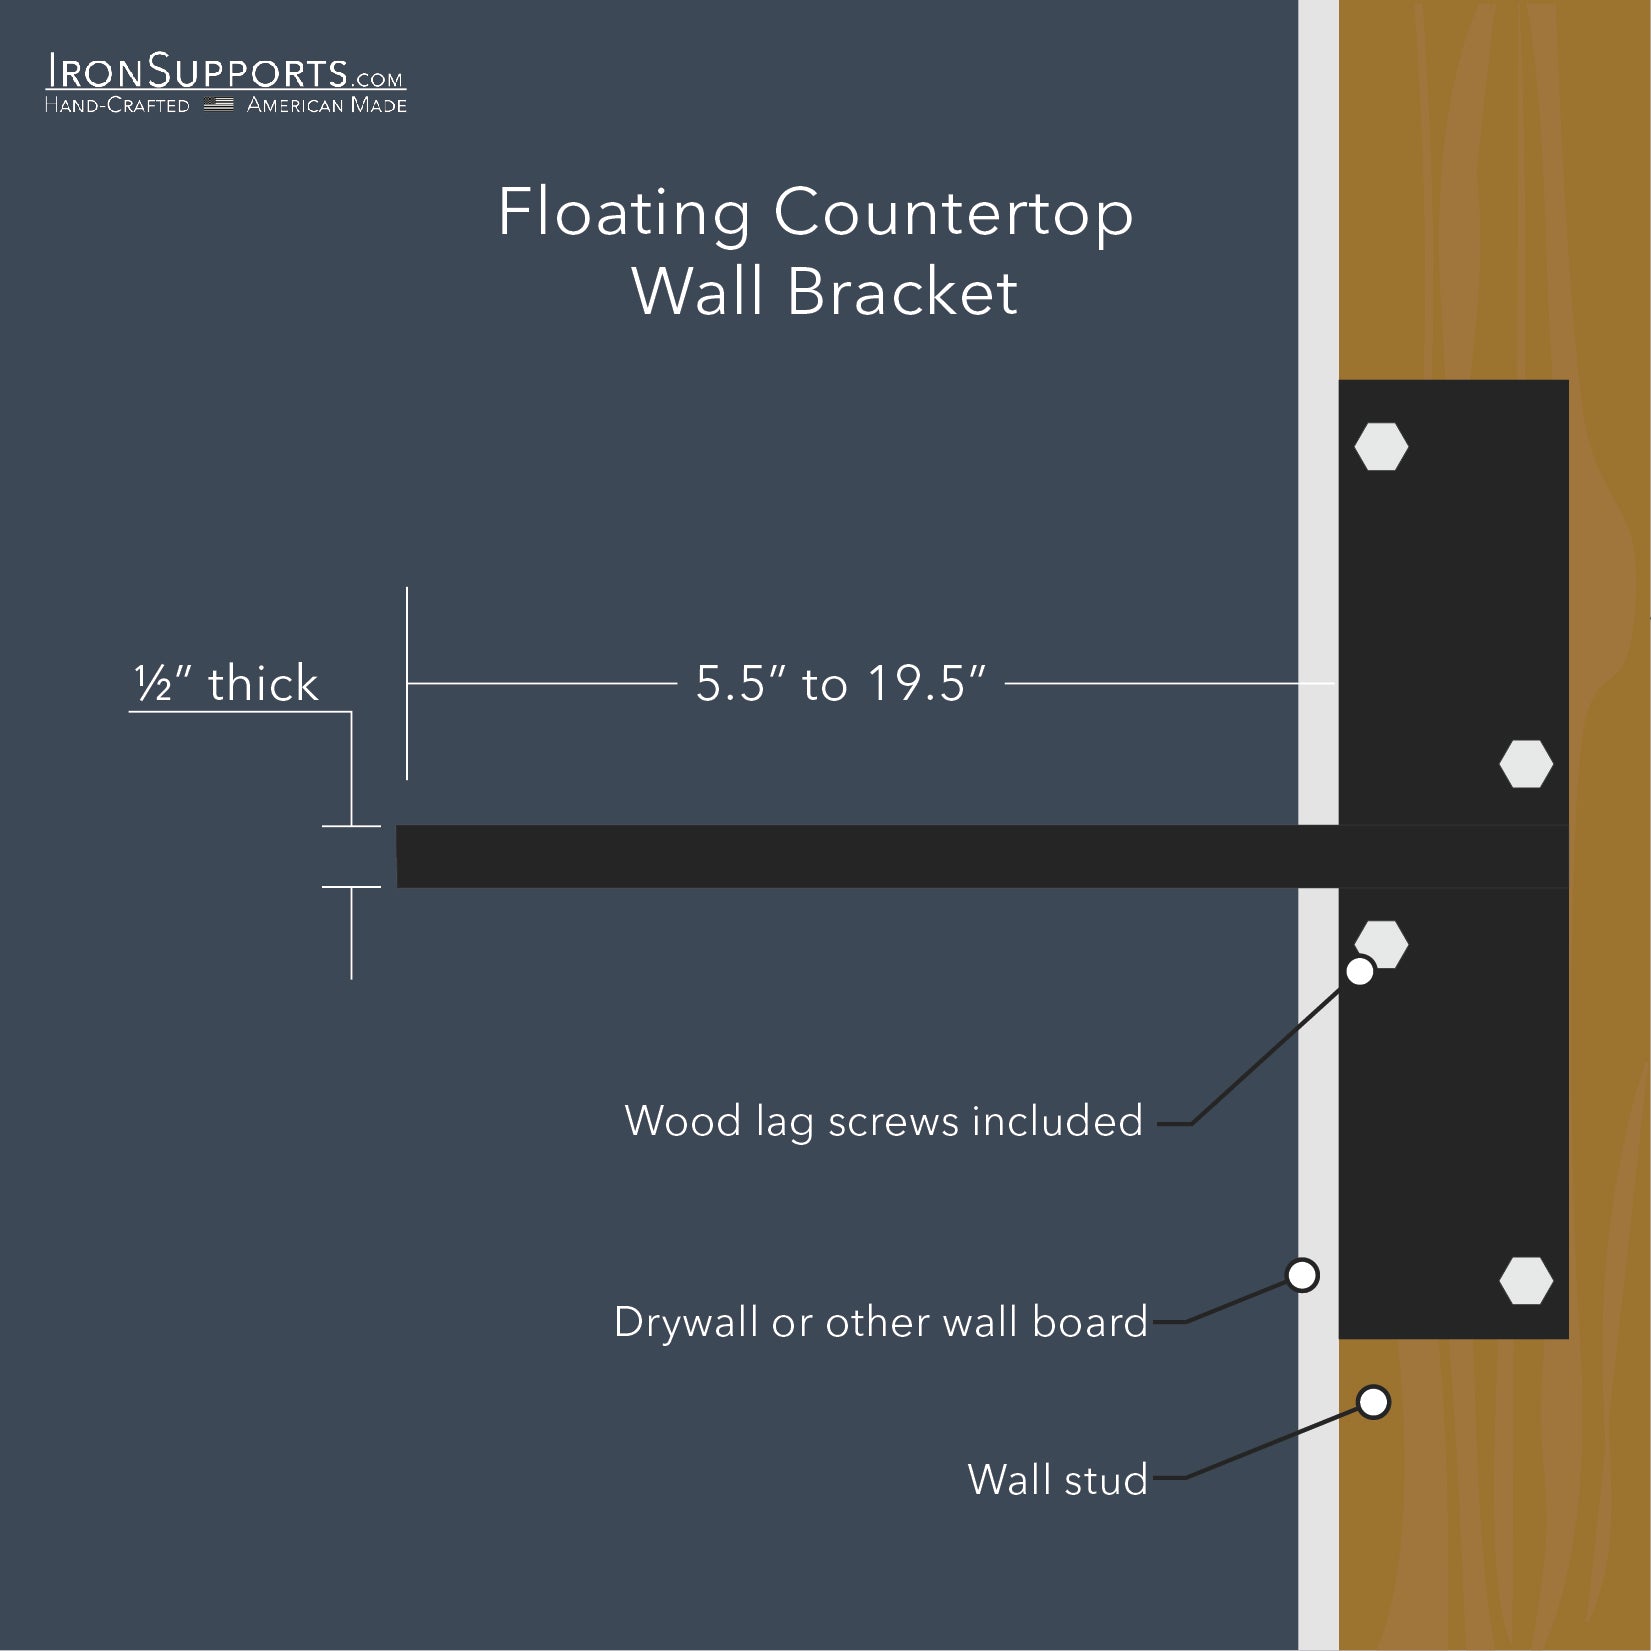 Floating Countertop Wall Bracket displayed with measurements and included screws. Offers hidden support for floating countertops, bars, desks, and more